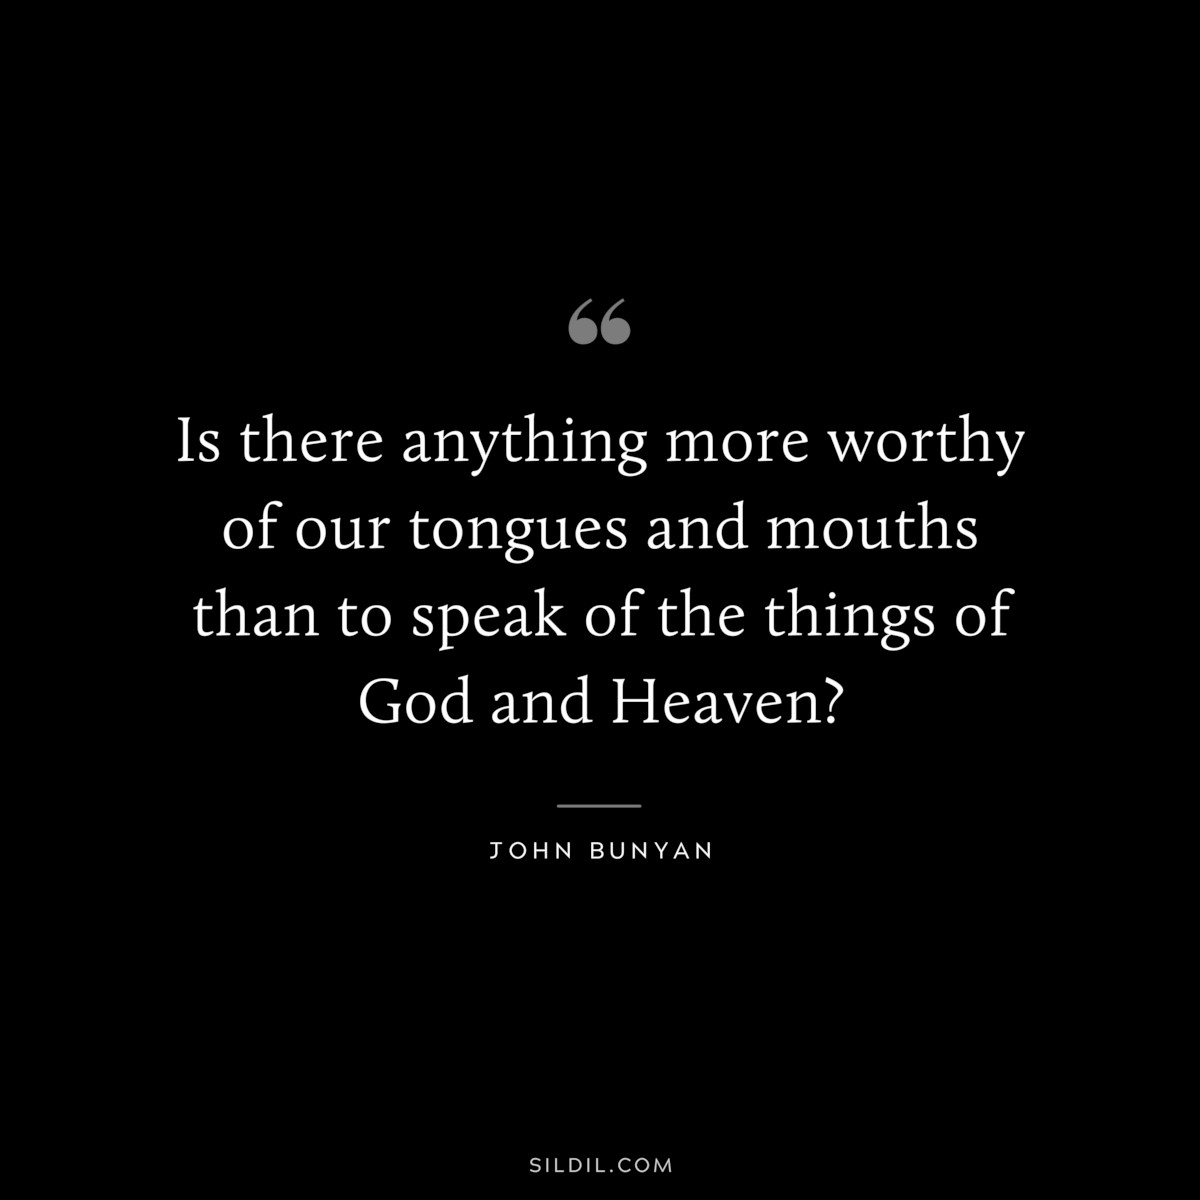 Is there anything more worthy of our tongues and mouths than to speak of the things of God and Heaven? ― John Bunyan